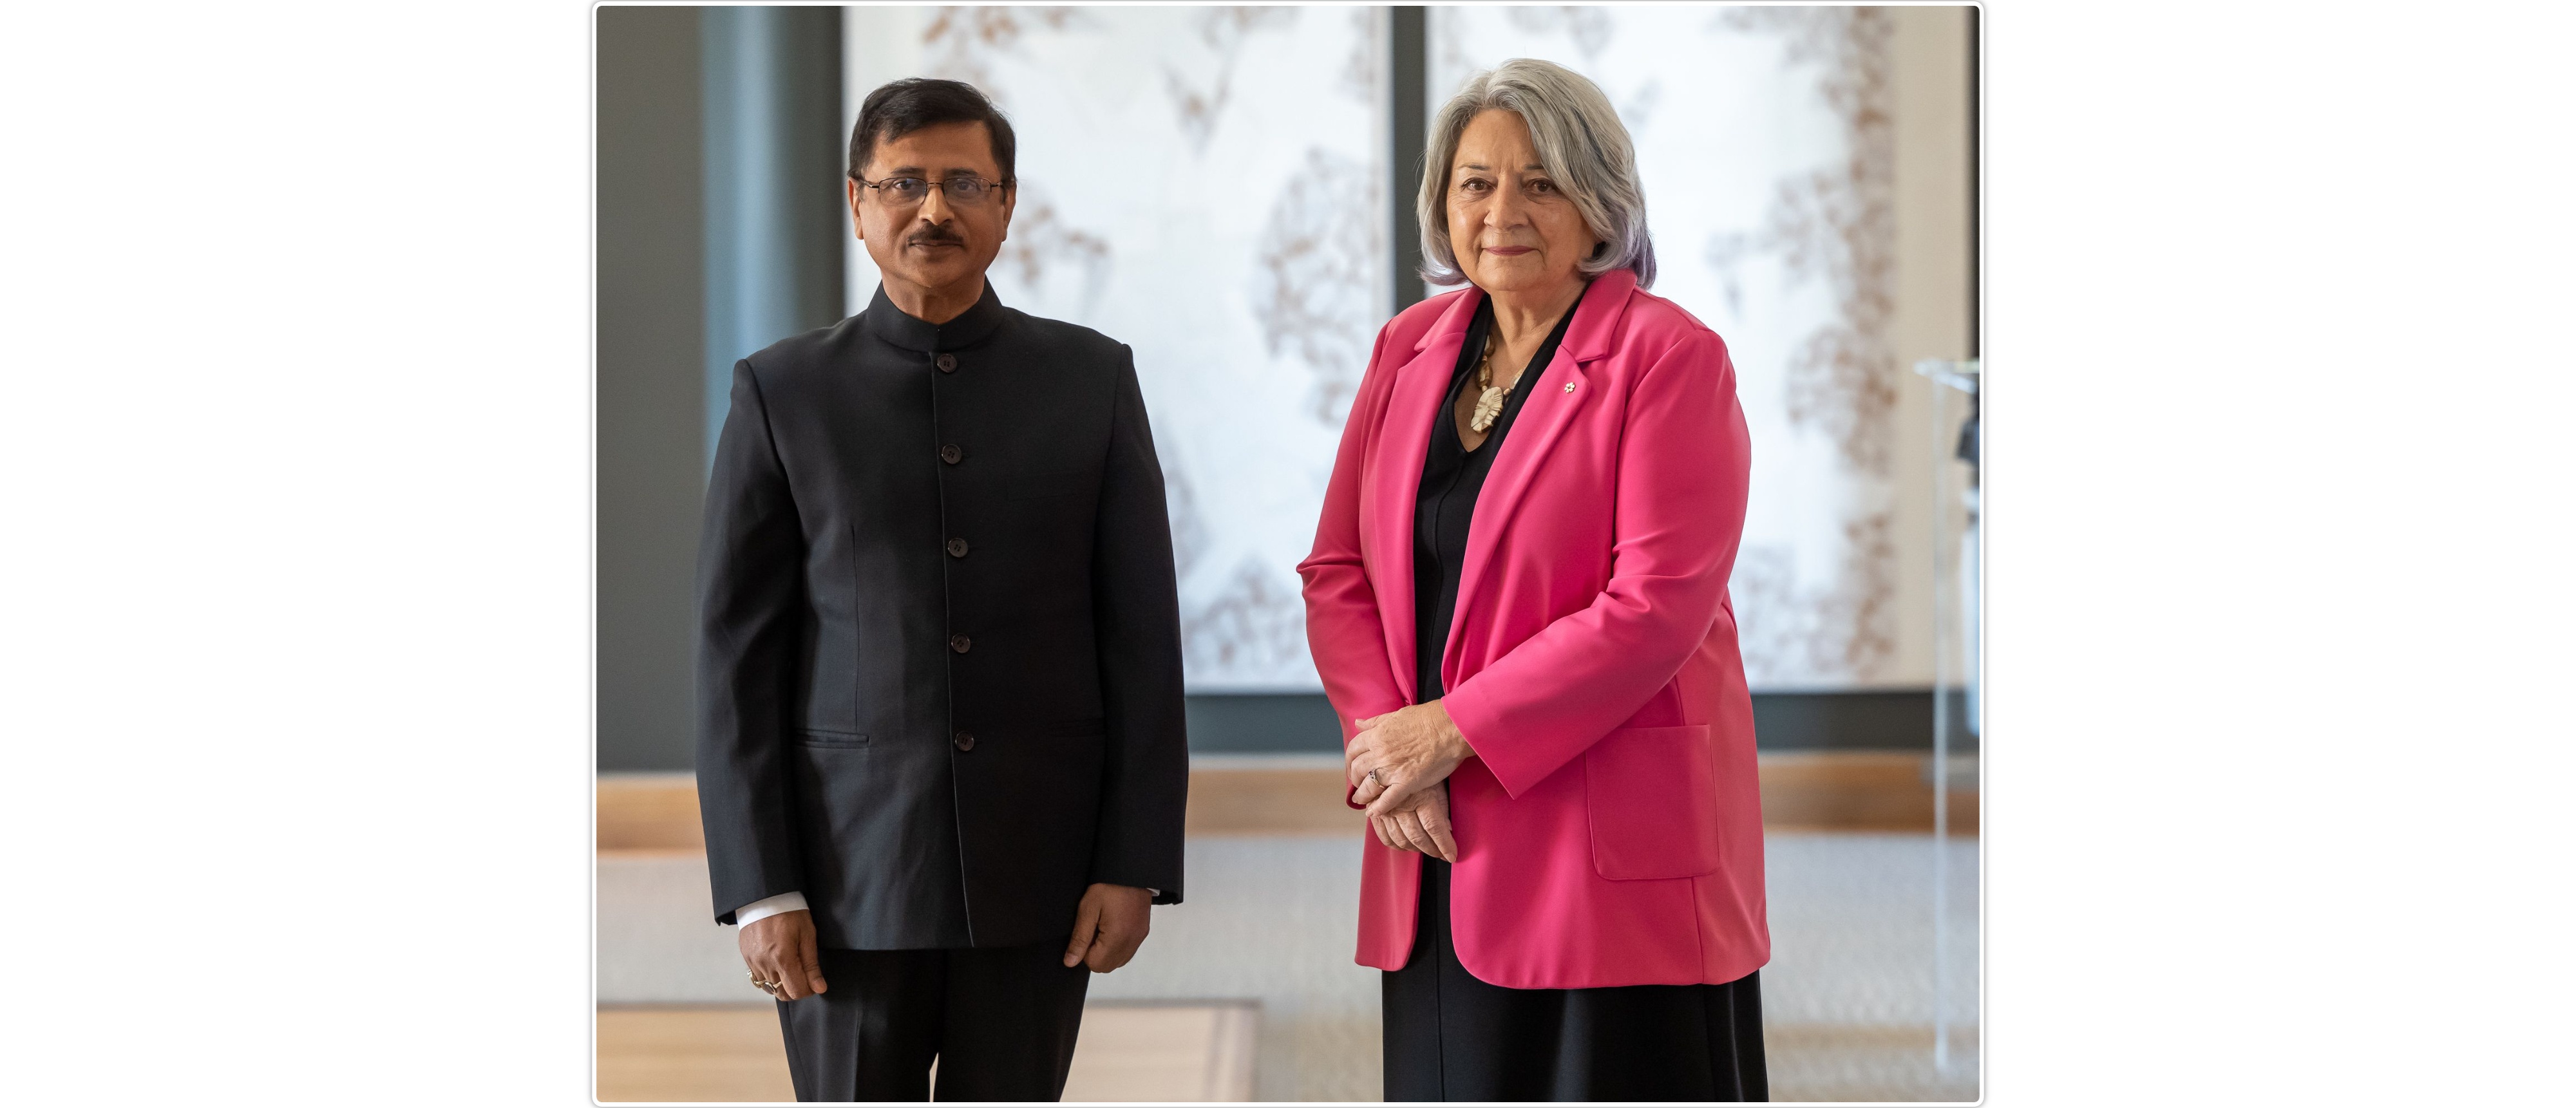  High Commissioner Shri Sanjay Kumar Verma presented Letter of Credence to H.E. The Right Honourable Mary Simon, the Governor General of Canada on 23 November 2022